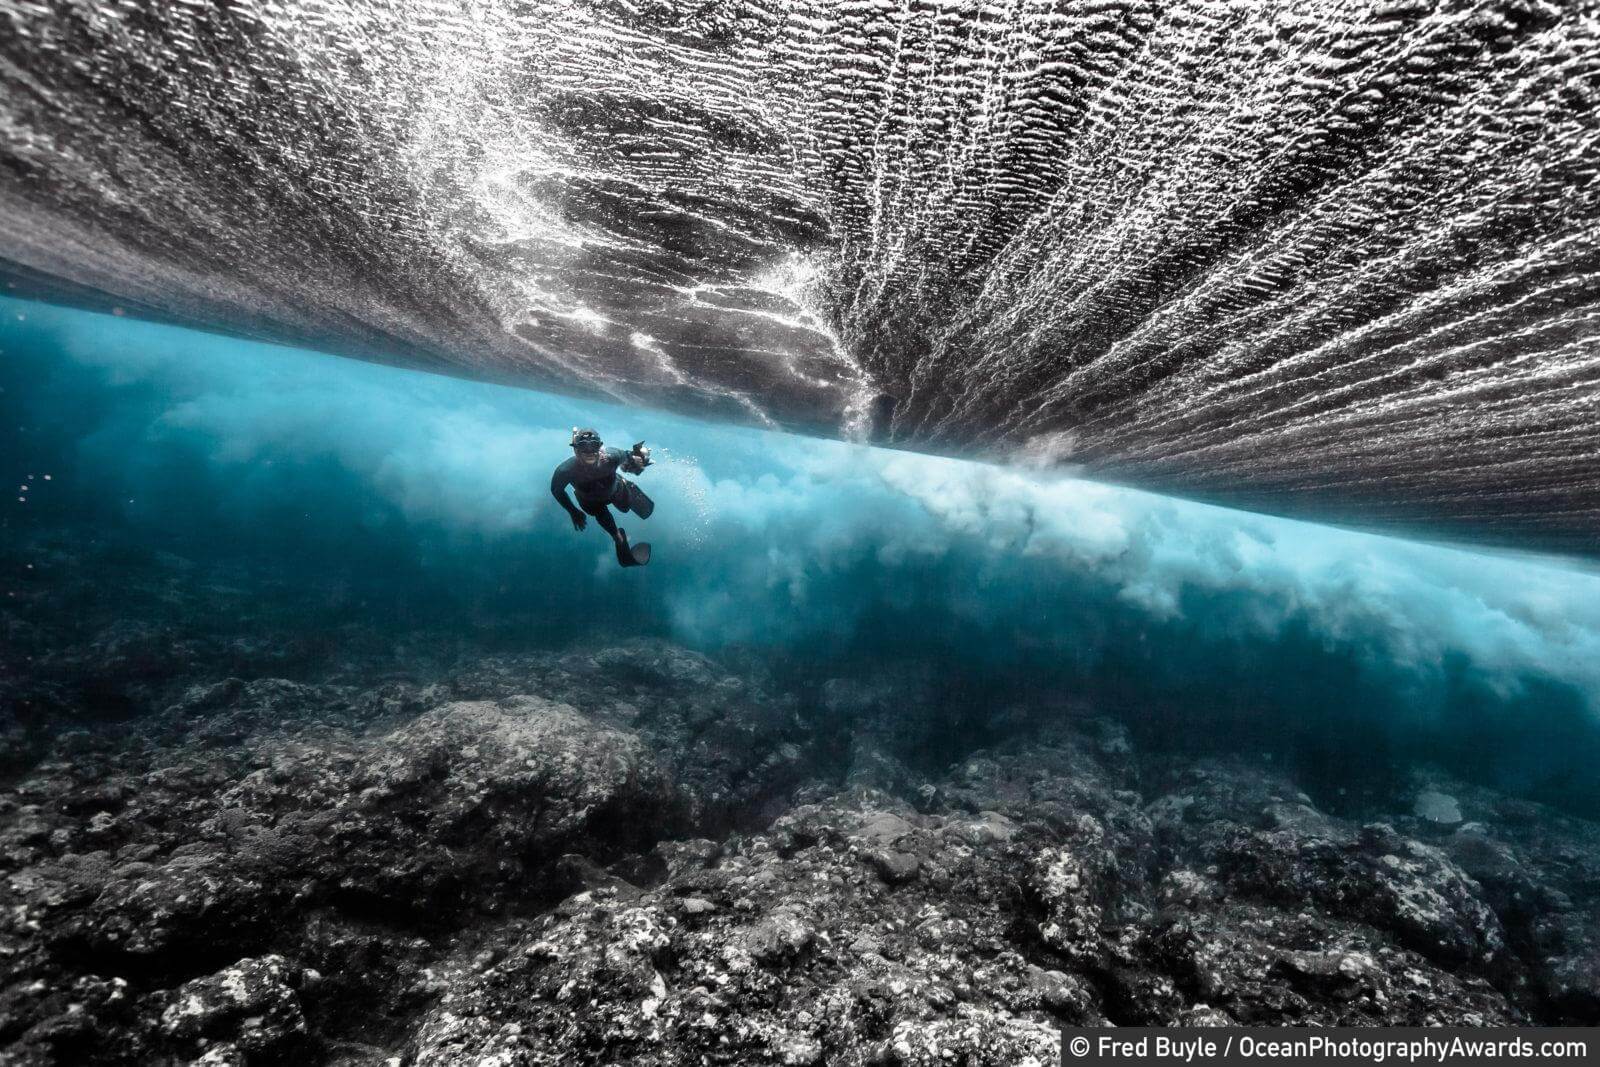 A freediver swims below a breaking wave off Rurutu Island, Autrales, French Polynesia. "We had actually spent nine hours looking for humpback whales and decided to have a quick look at the breaking waves," says photographer Fred Buyle.